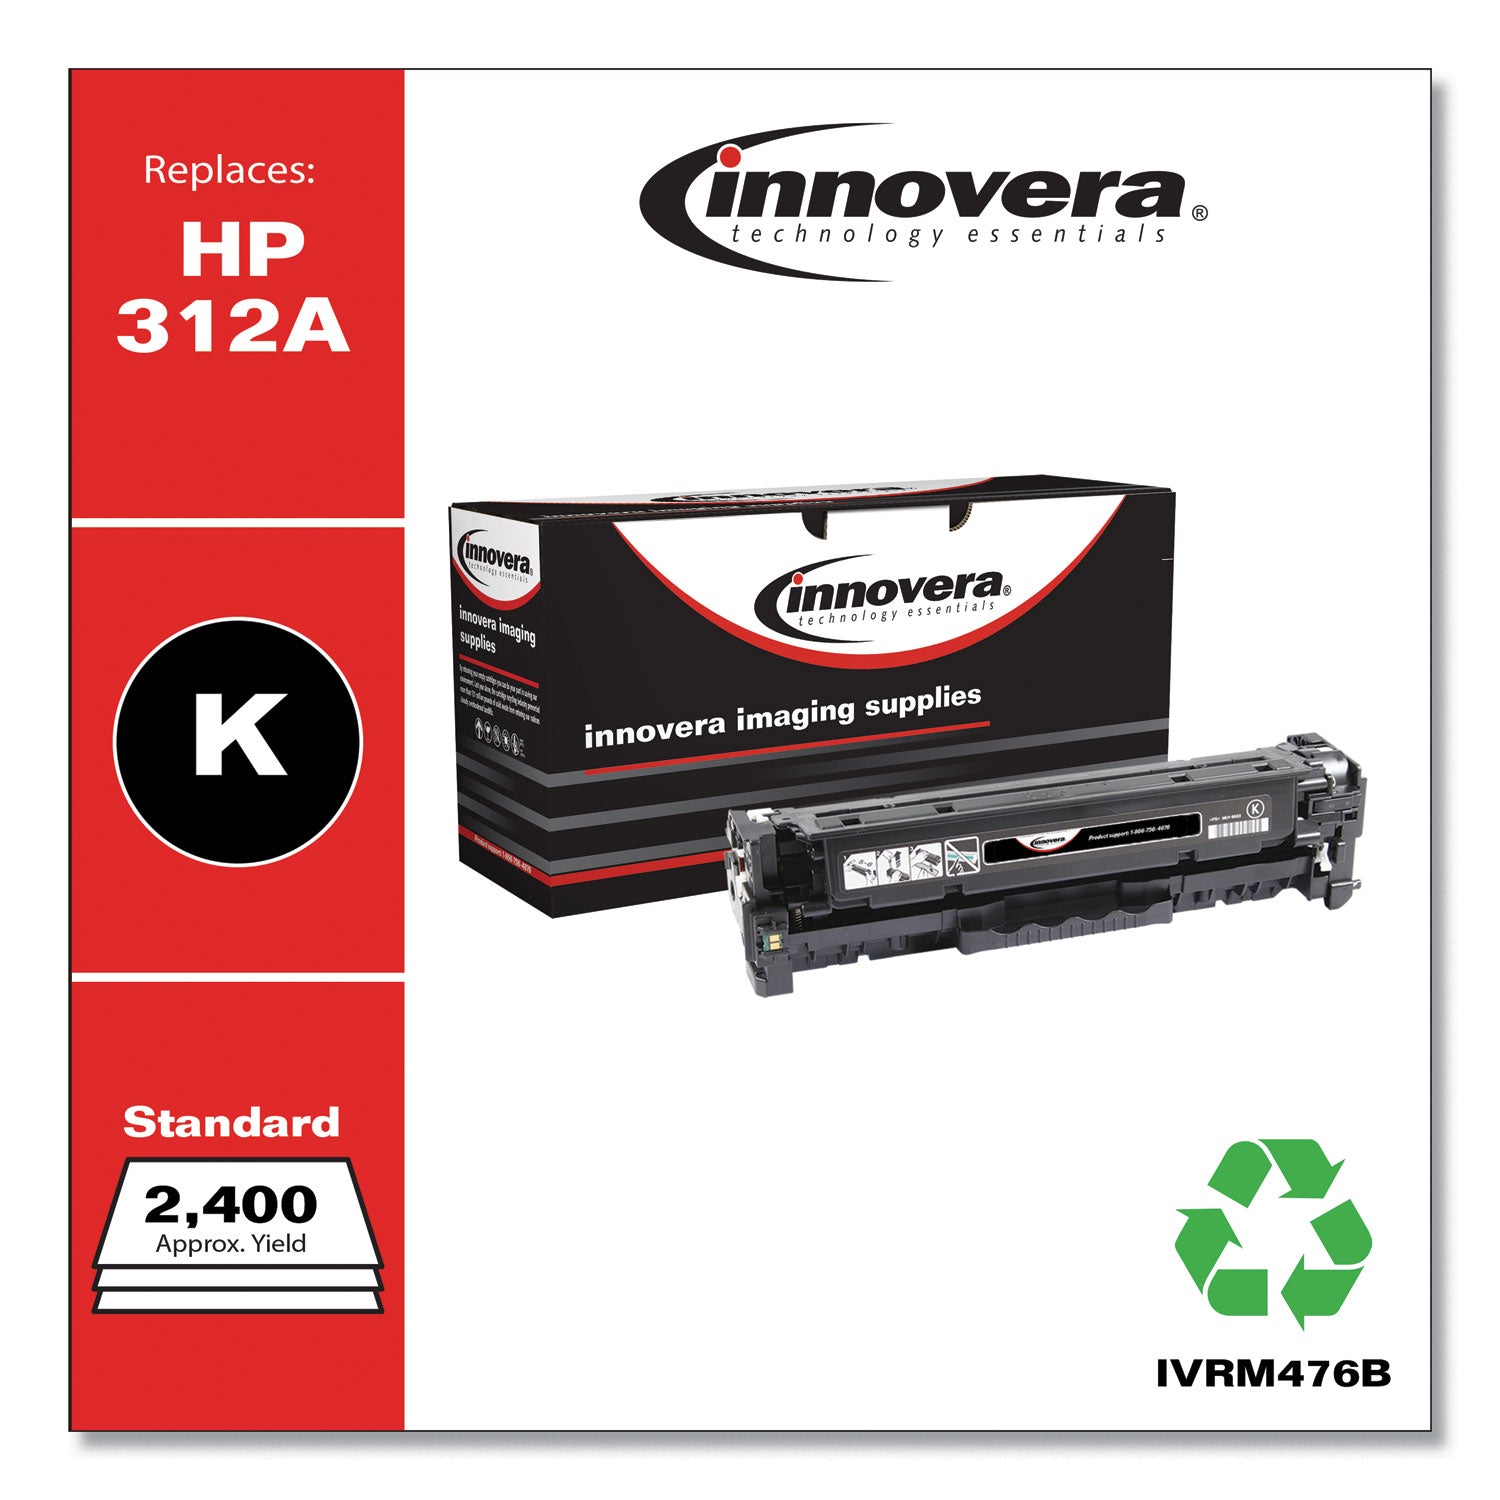 Remanufactured Black Toner, Replacement for 312A (CF380A), 2,400 Page-Yield - 